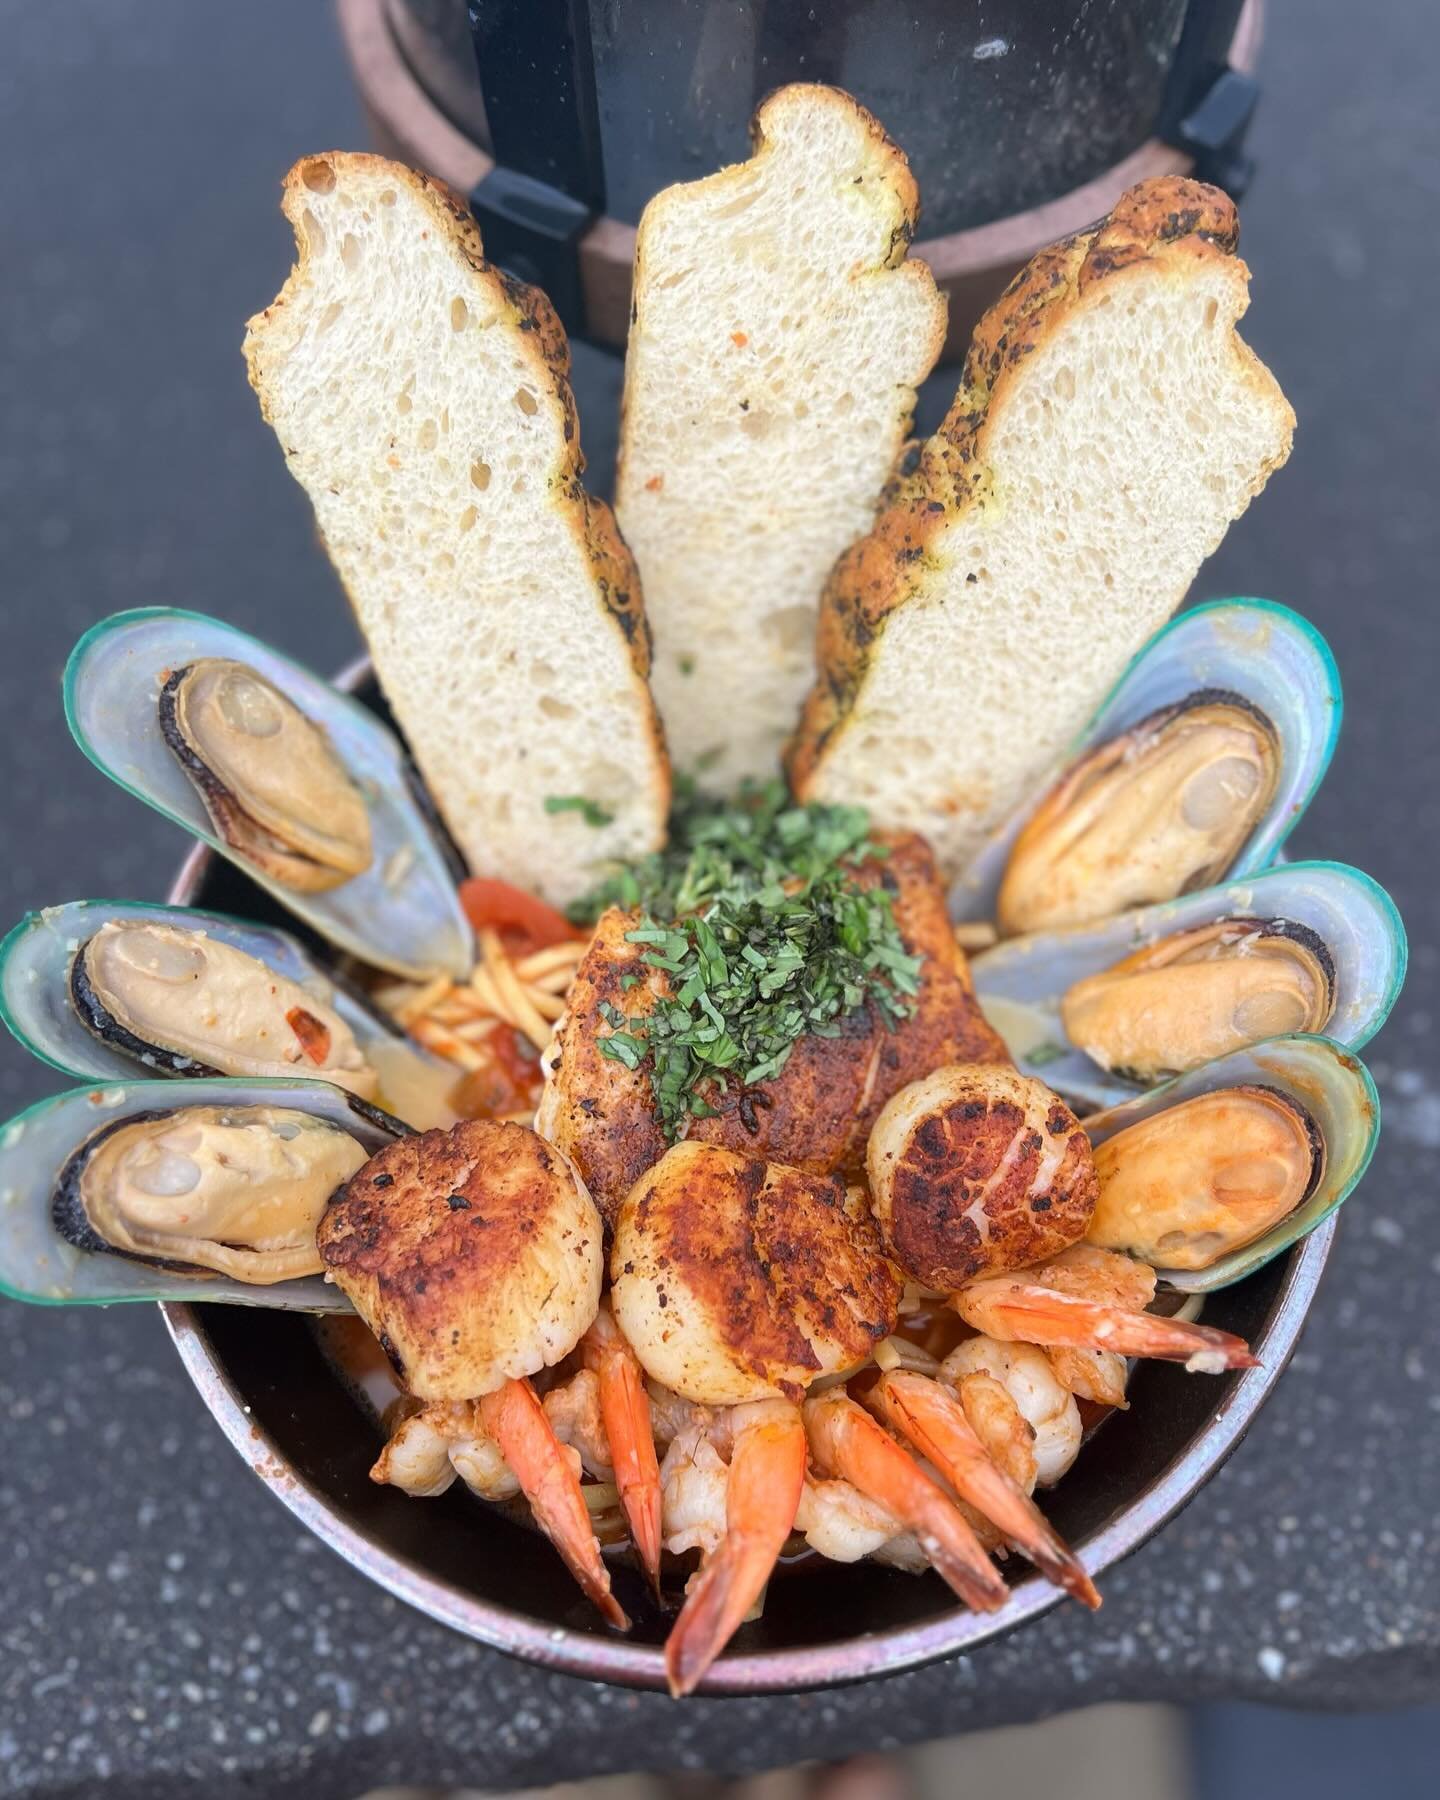 Monkey Cioppino- Pan-seared sea scallops, shrimp, mussels and cod loin tossed in an aromatic tomato broth with hints of basil and cayenne, over linguine pasta. Served with ciabatta bread (Spicy)